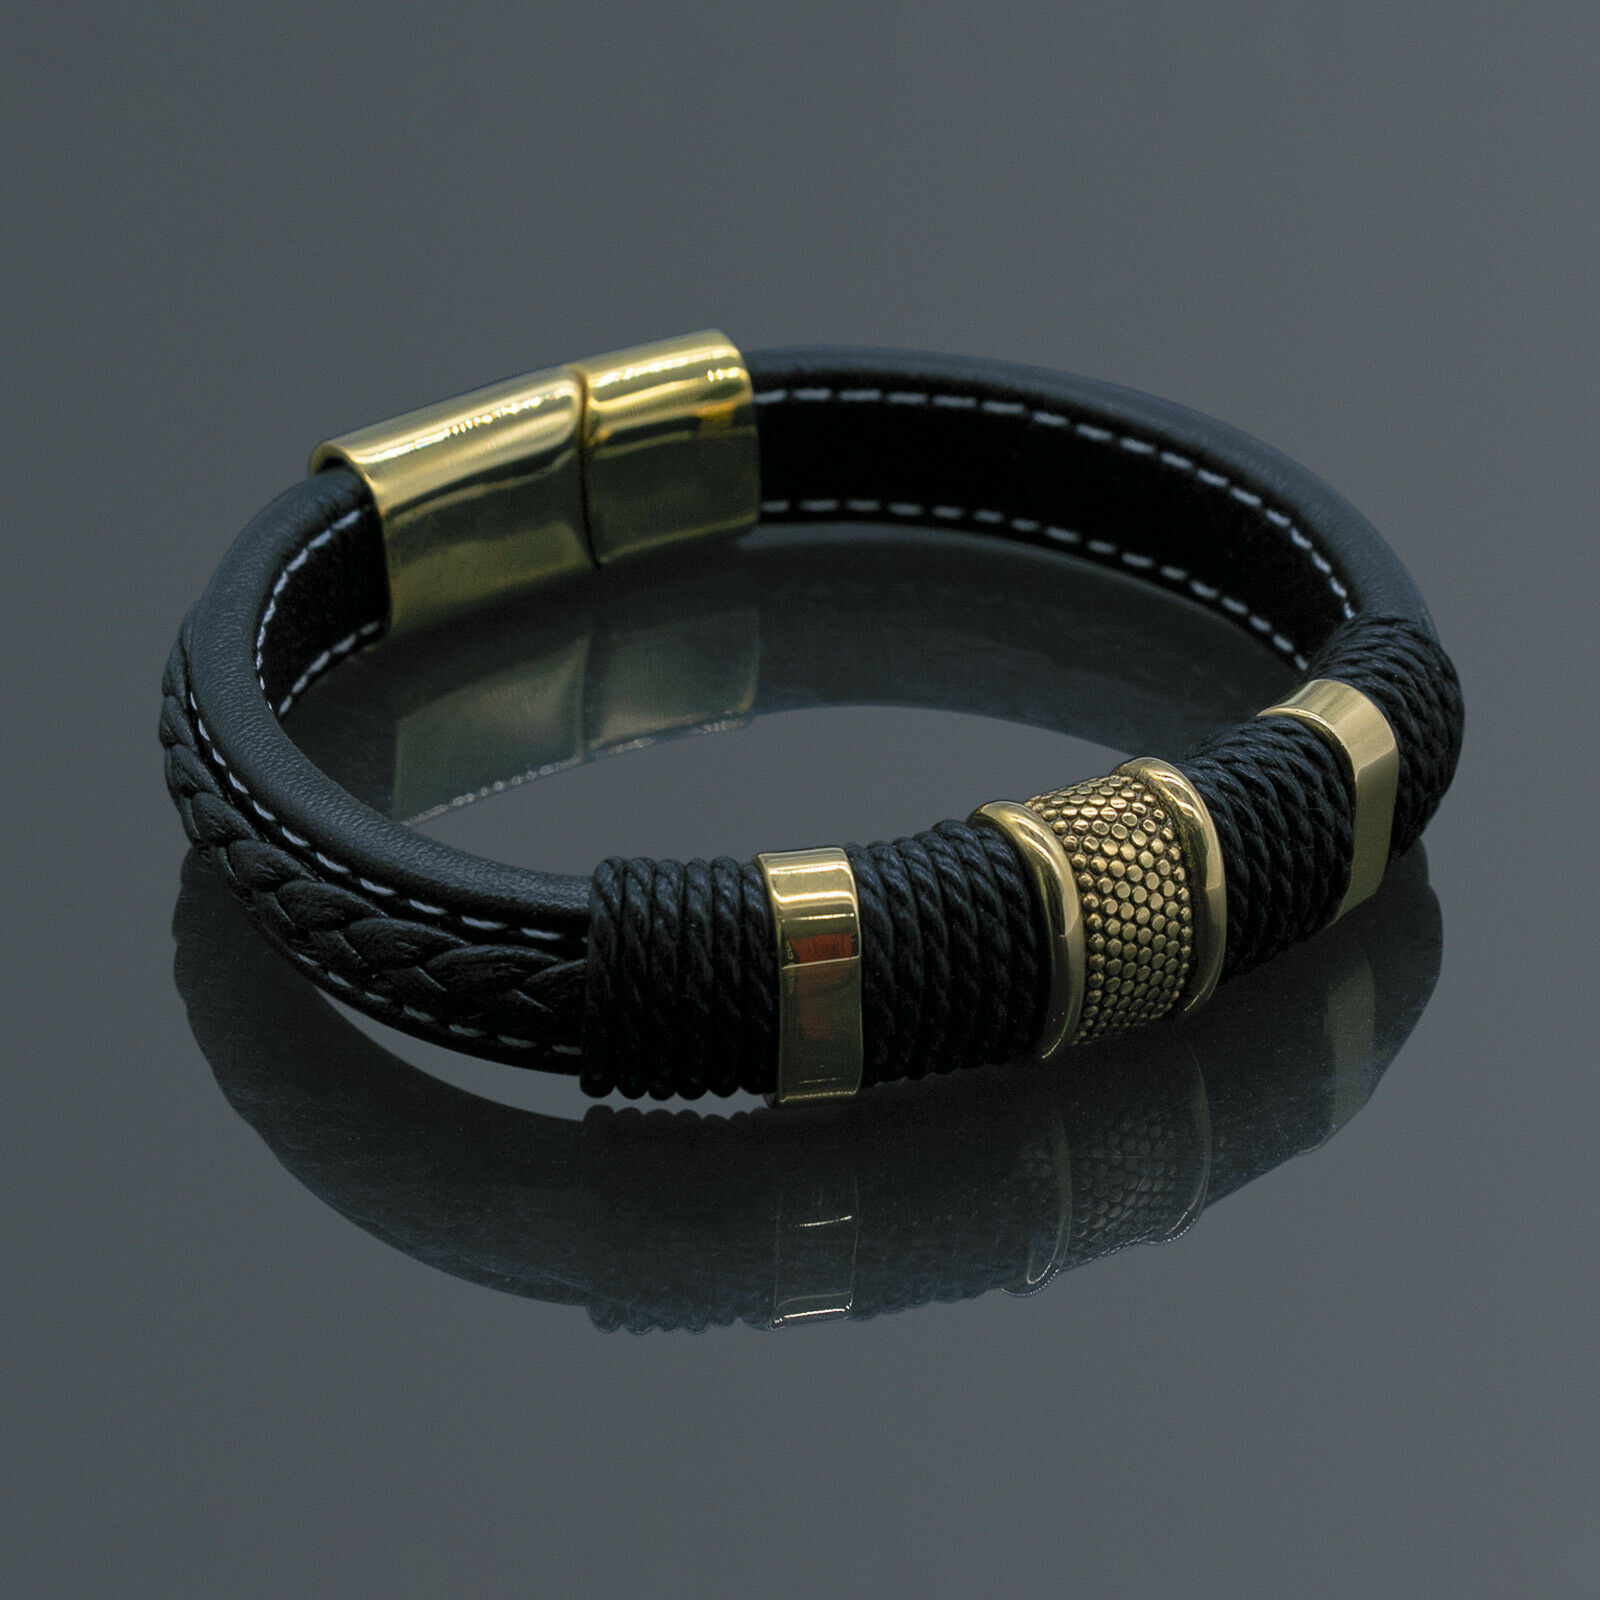 Men's Stainless Steel Leather Bracelet Magnetic Gold Clasp Bangle Cuff Black